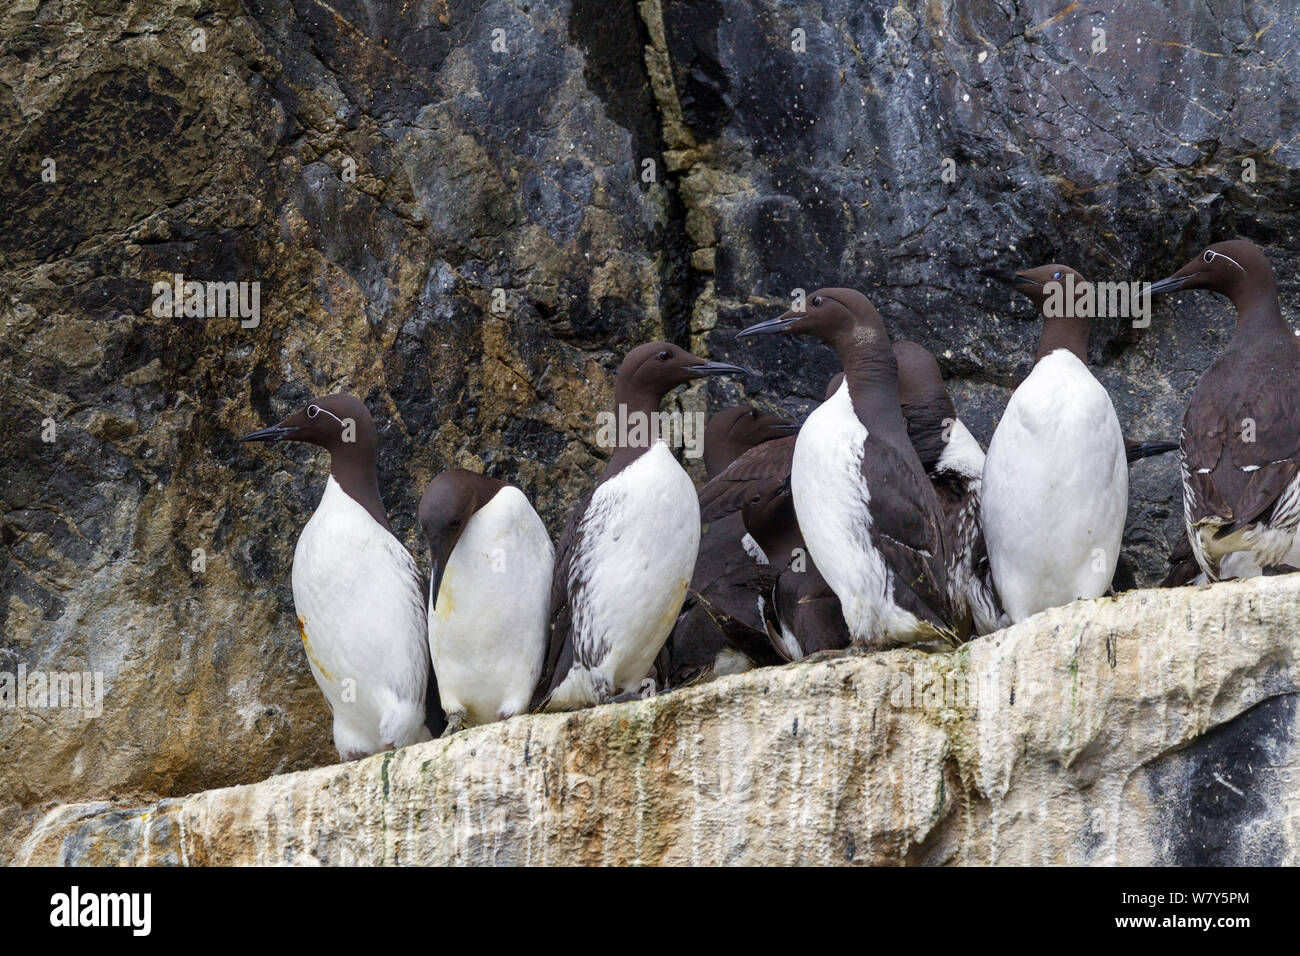 Common guillemots (Uria aalge) crowded onto a breeding ledge. The birds on the left and right are the bridled form of the common guillemot with white around the eye. St Kilda, Outer Hebrides, Scotland. June. Stock Photo